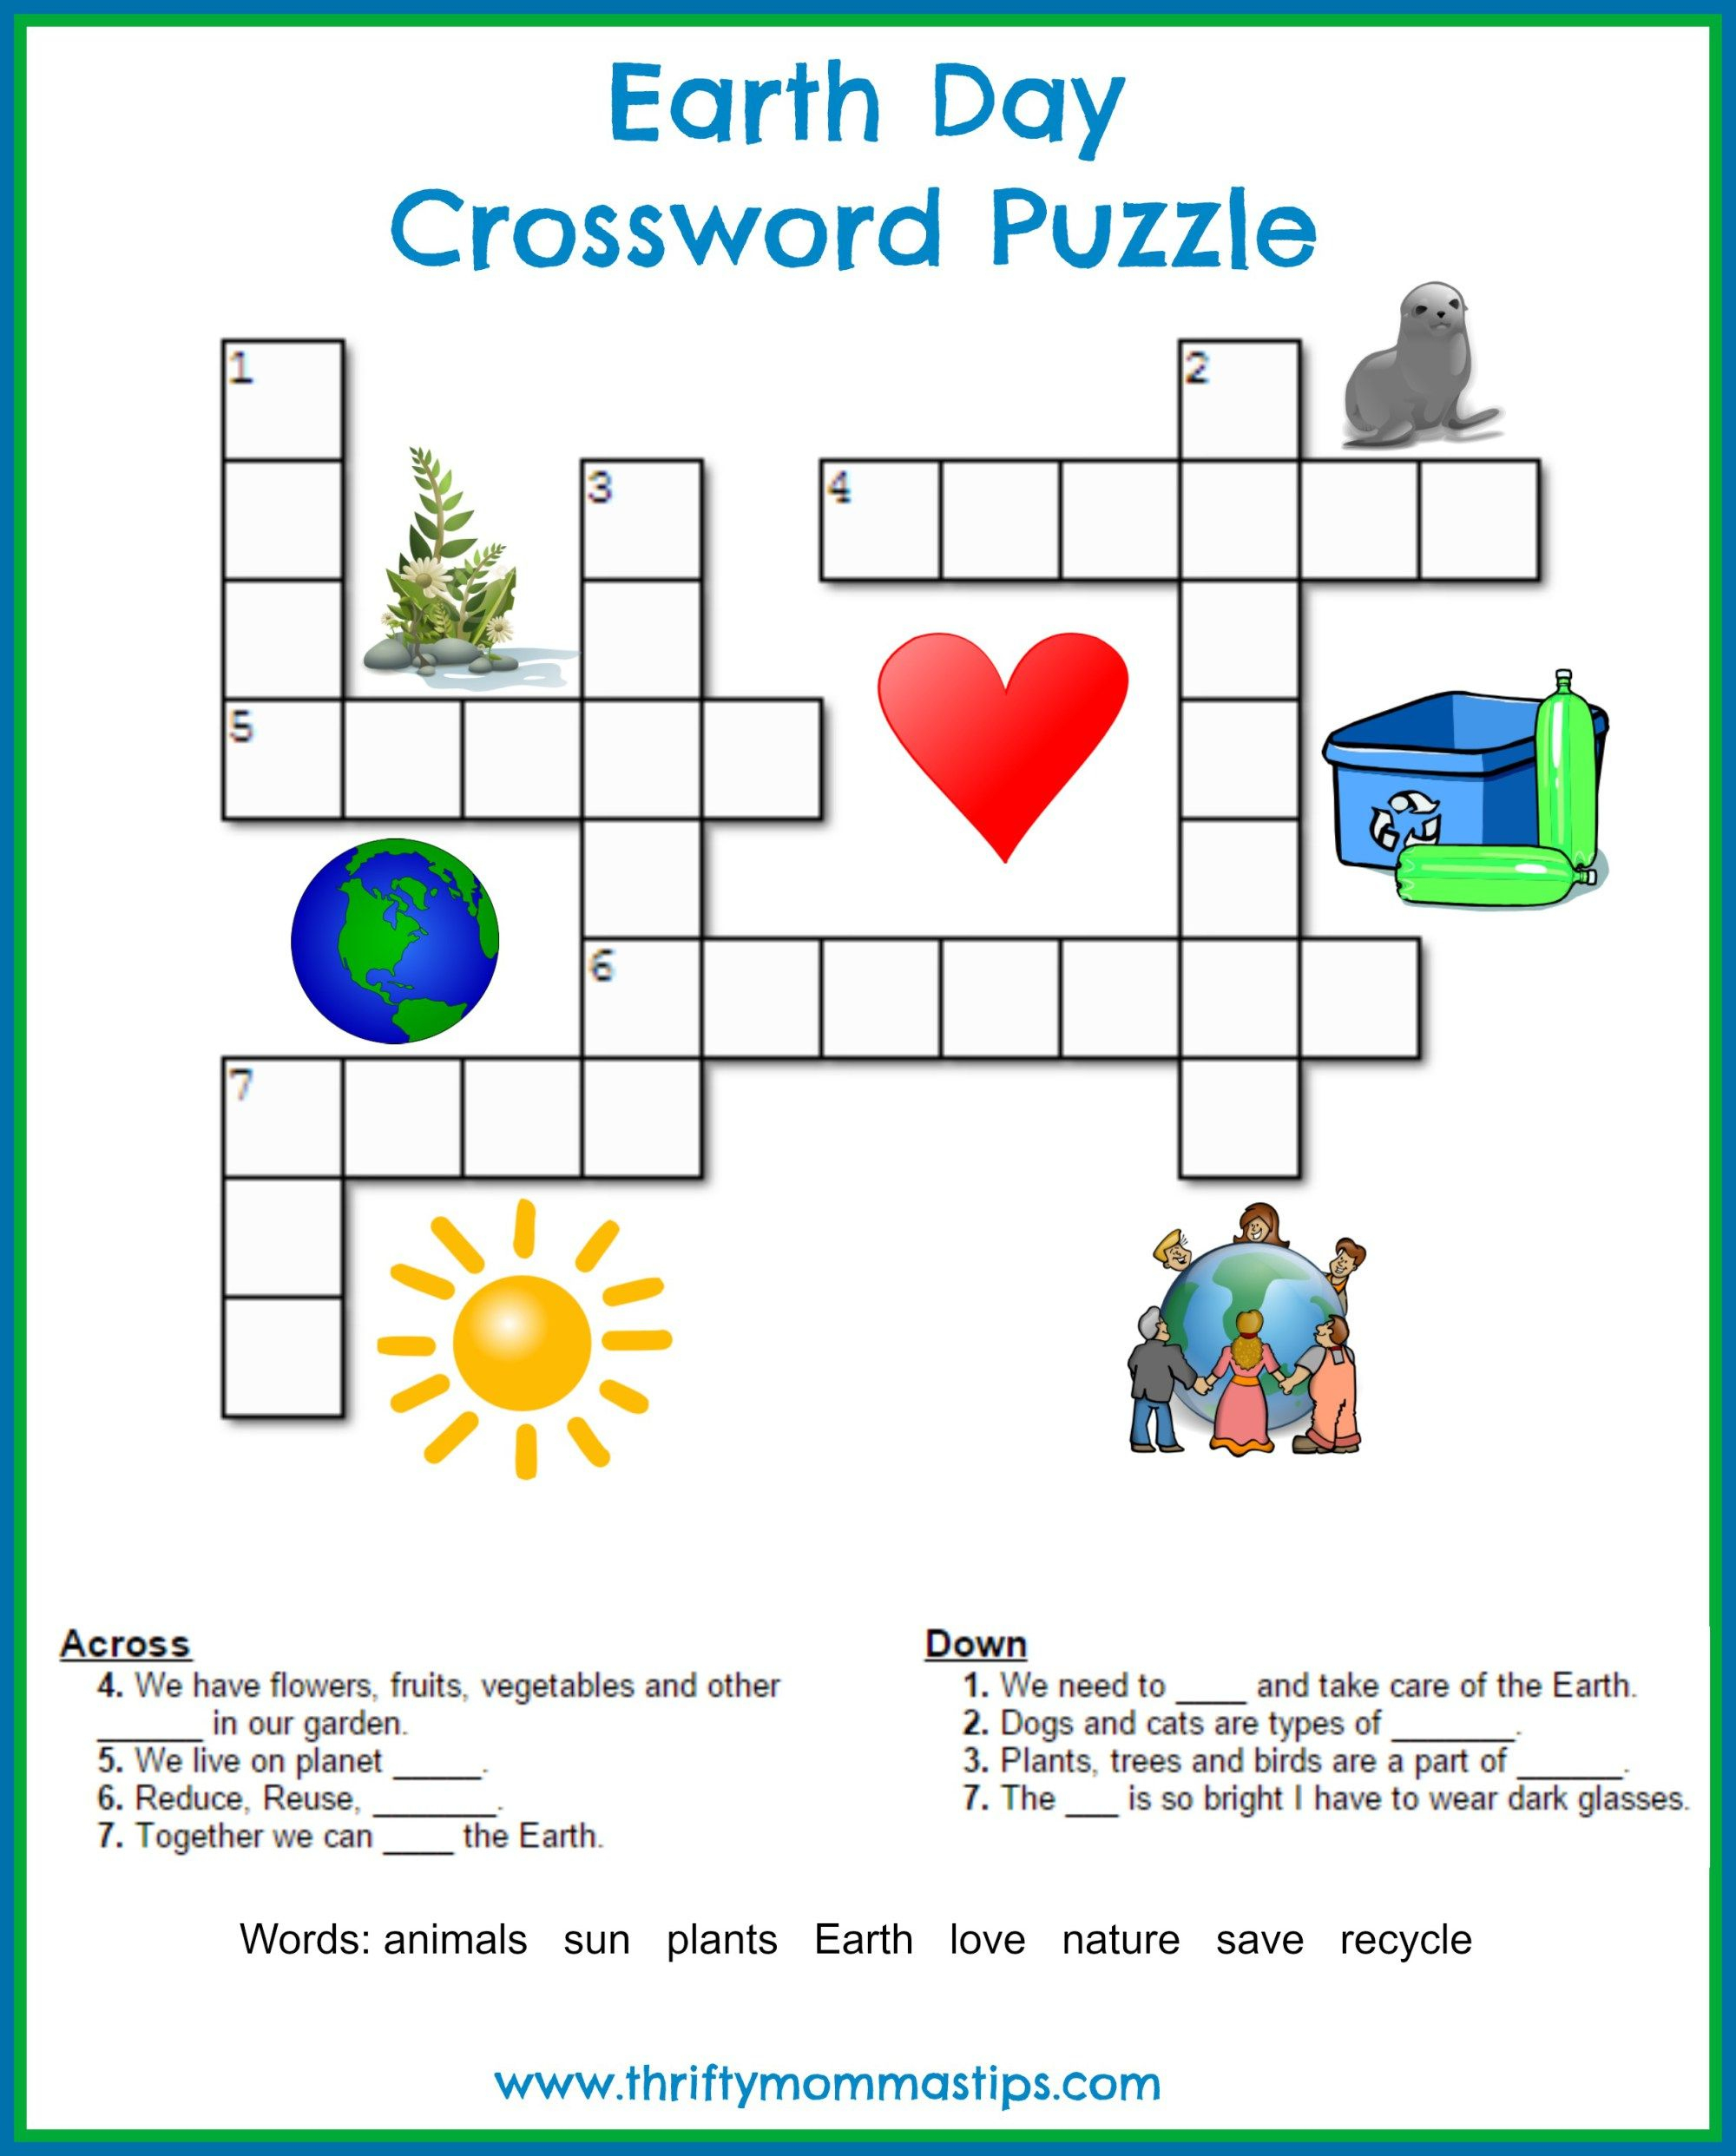 Earth Day Crossword Puzzle | Earth Day | Printable Crossword Puzzles - Printable Crossword Of The Day